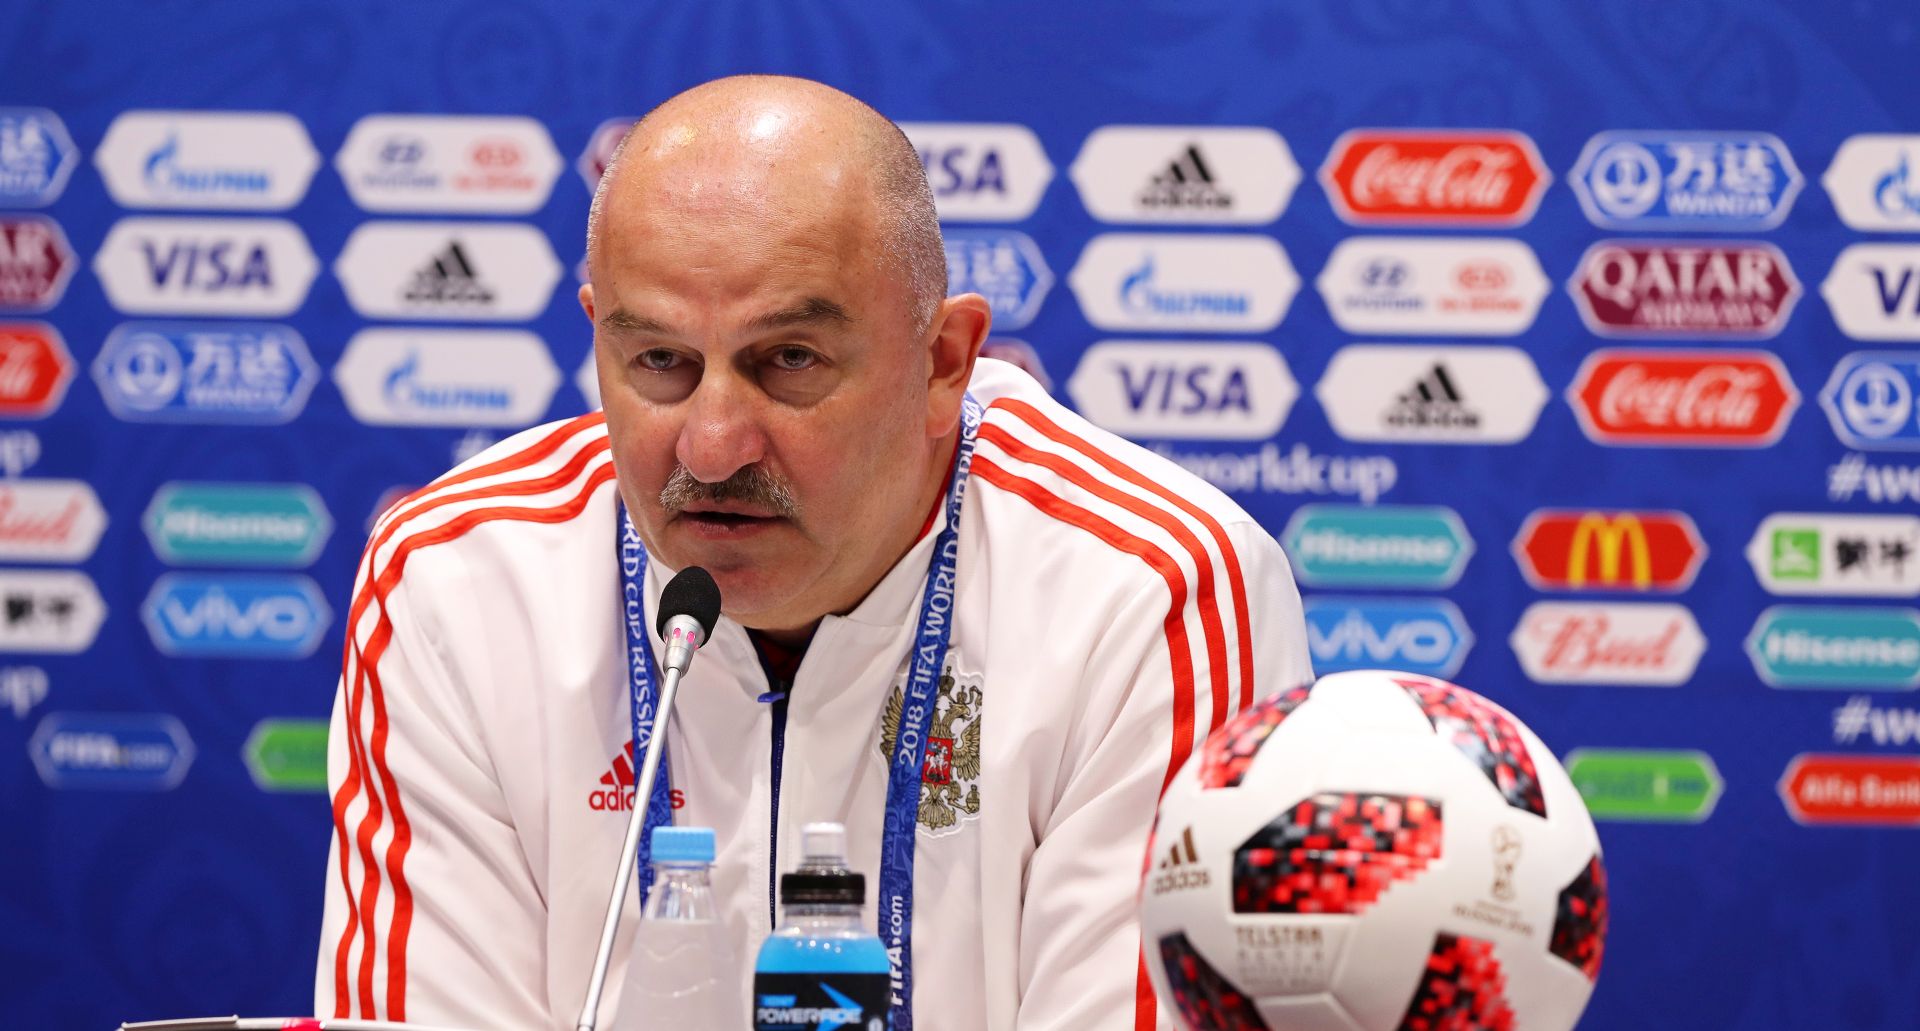 epa06867512 Russia's head coach Stanislav Cherchesov speaks during a press conference in Sochi, Russia, 06 July 2018. Russia will face Croatia in their FIFA World Cup 2018 quarter final soccer match on 07 July 2018 in Sochi.  EPA/MOHAMED MESSARA   EDITORIAL USE ONLY